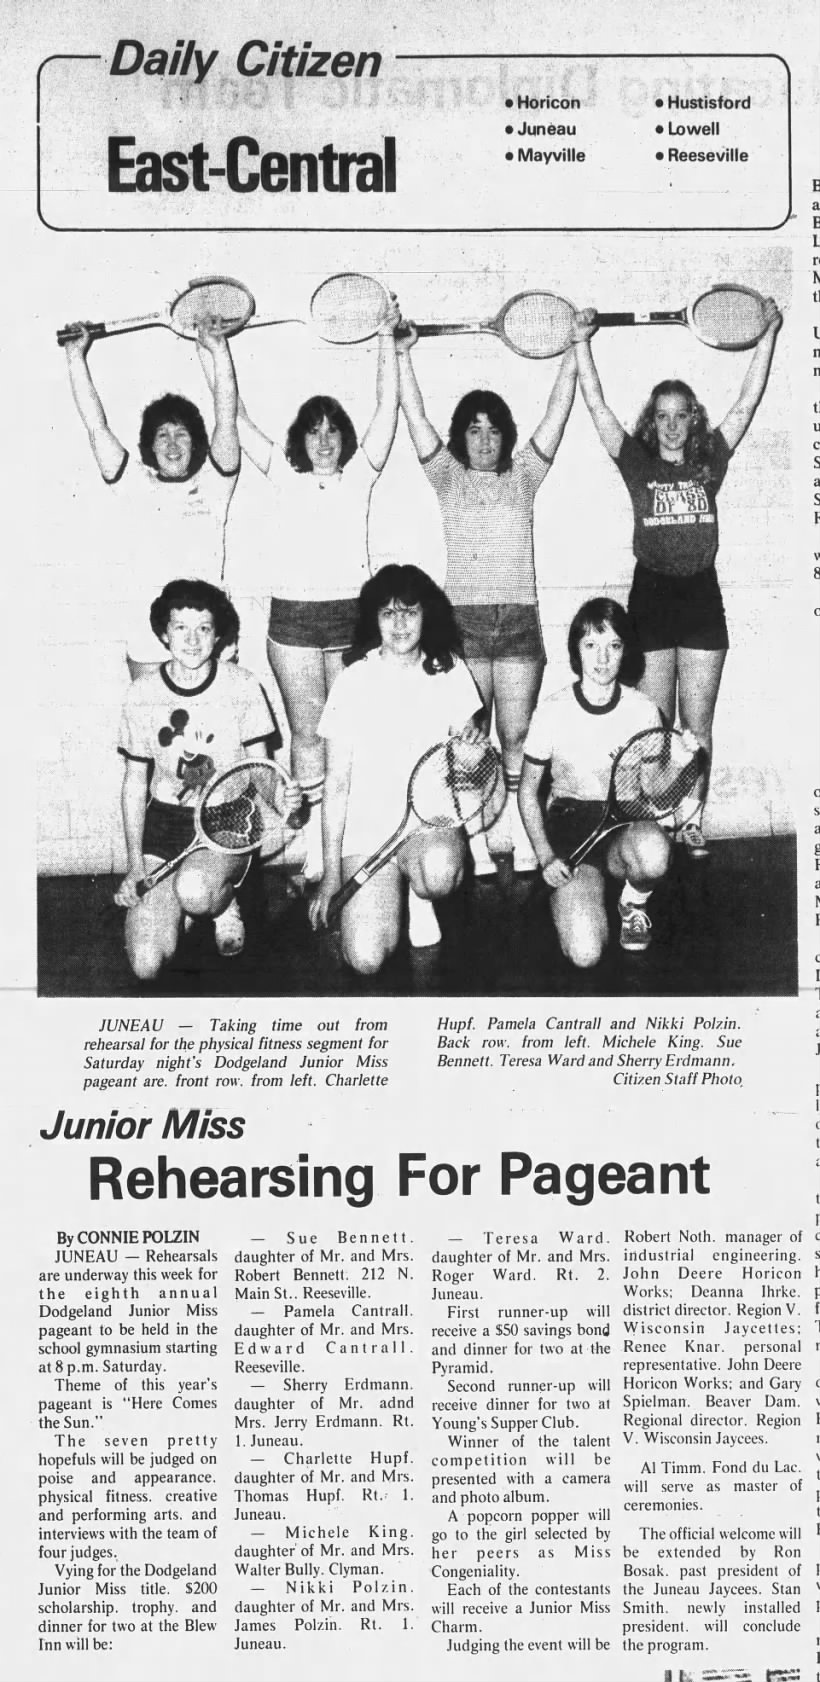 Cantrall, Pam - Junior Miss - PHOTO - 1979